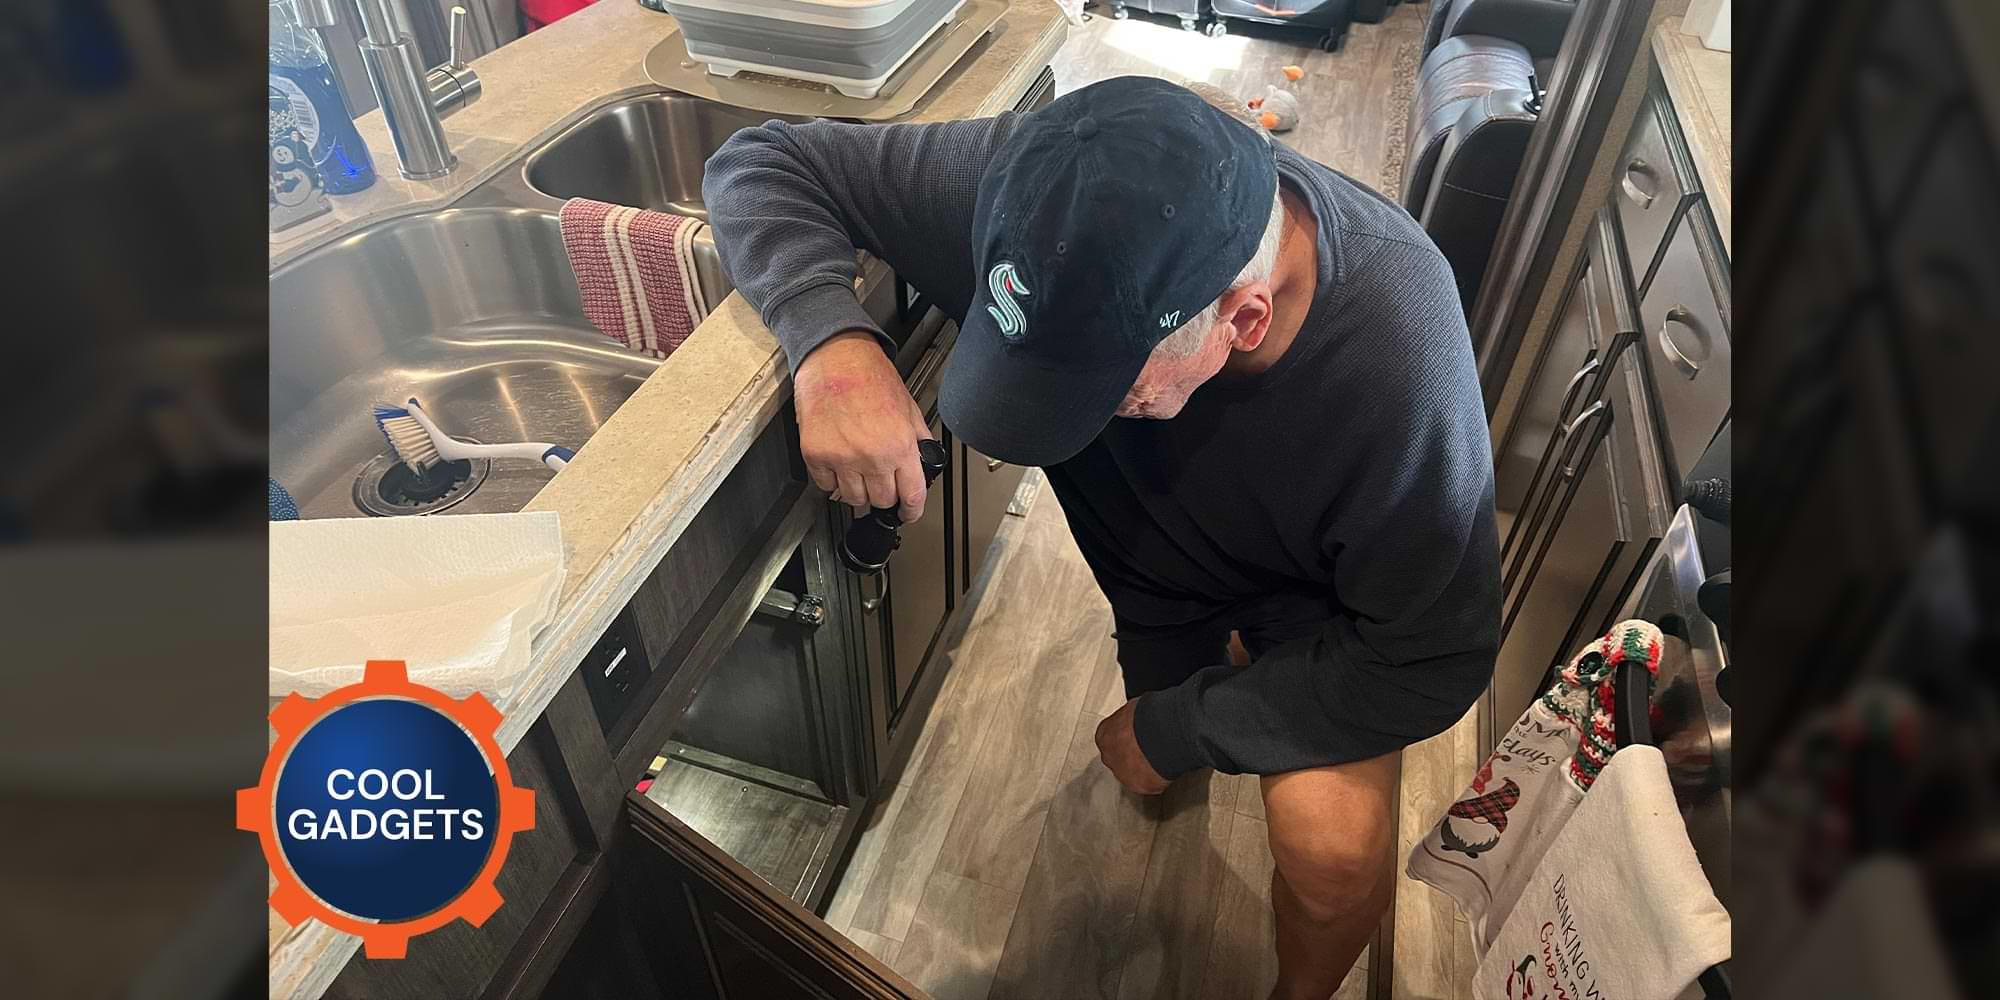 a man holding a flashlight kneels looking into the cabinet beneath an RV sink